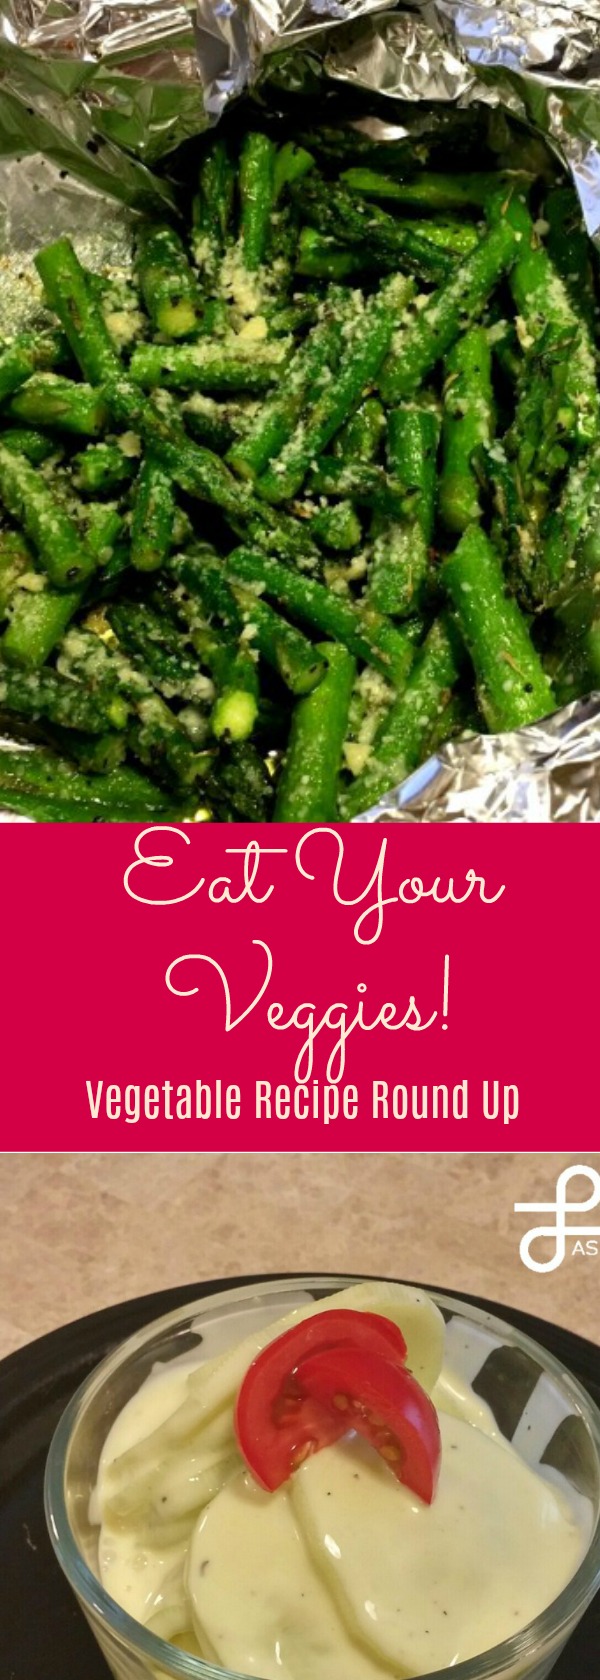 National Eat Your Veggies Day: A Vegetable Recipe Round-Up